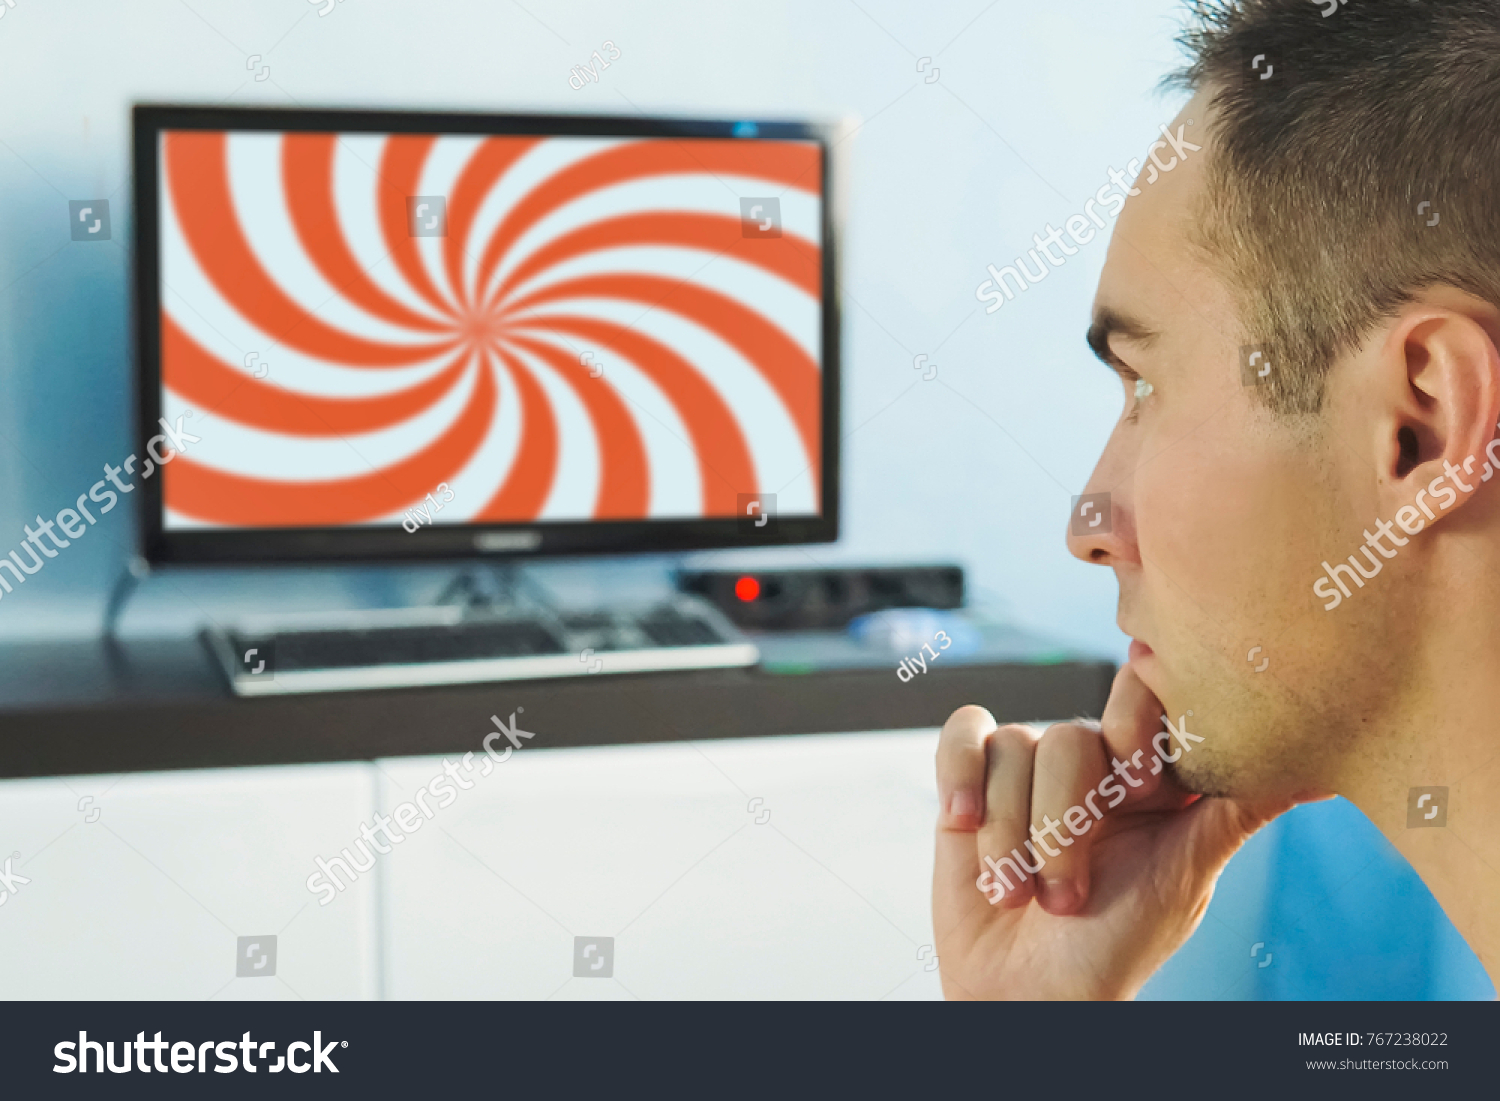 Brainwashed elderly man. hypnotic spiral on the screen of the TV. The young man hypnotized by false information on the monitor screen. False news on the Internet. viewer in front of the TV. #767238022